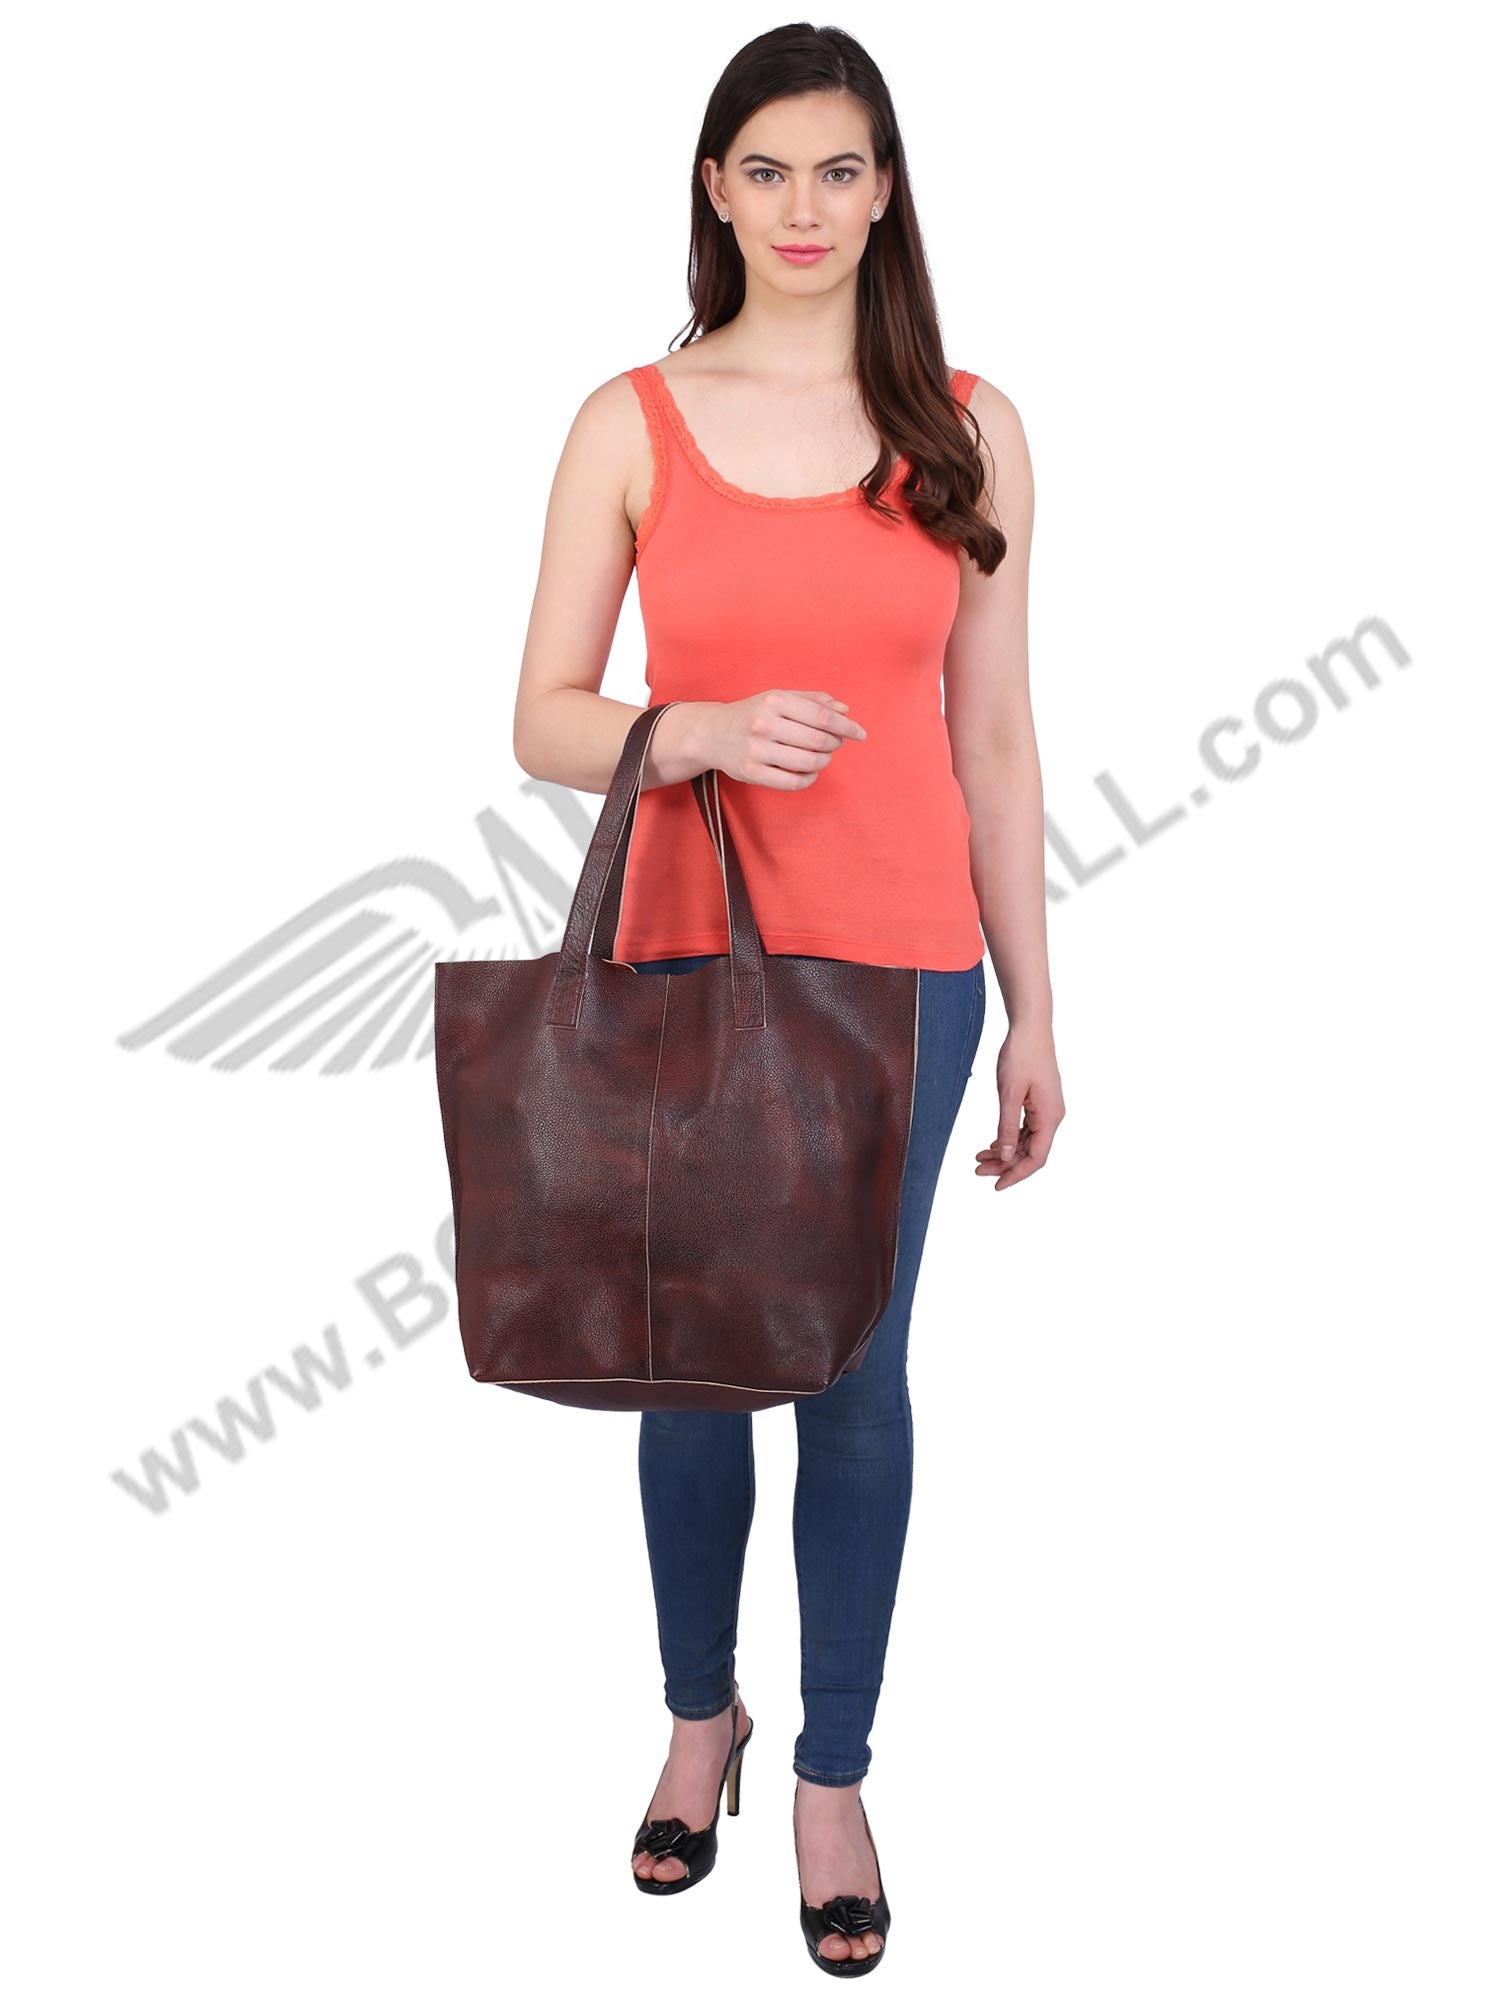 Front view of model posing with brown LUFT SHOPPING BAG